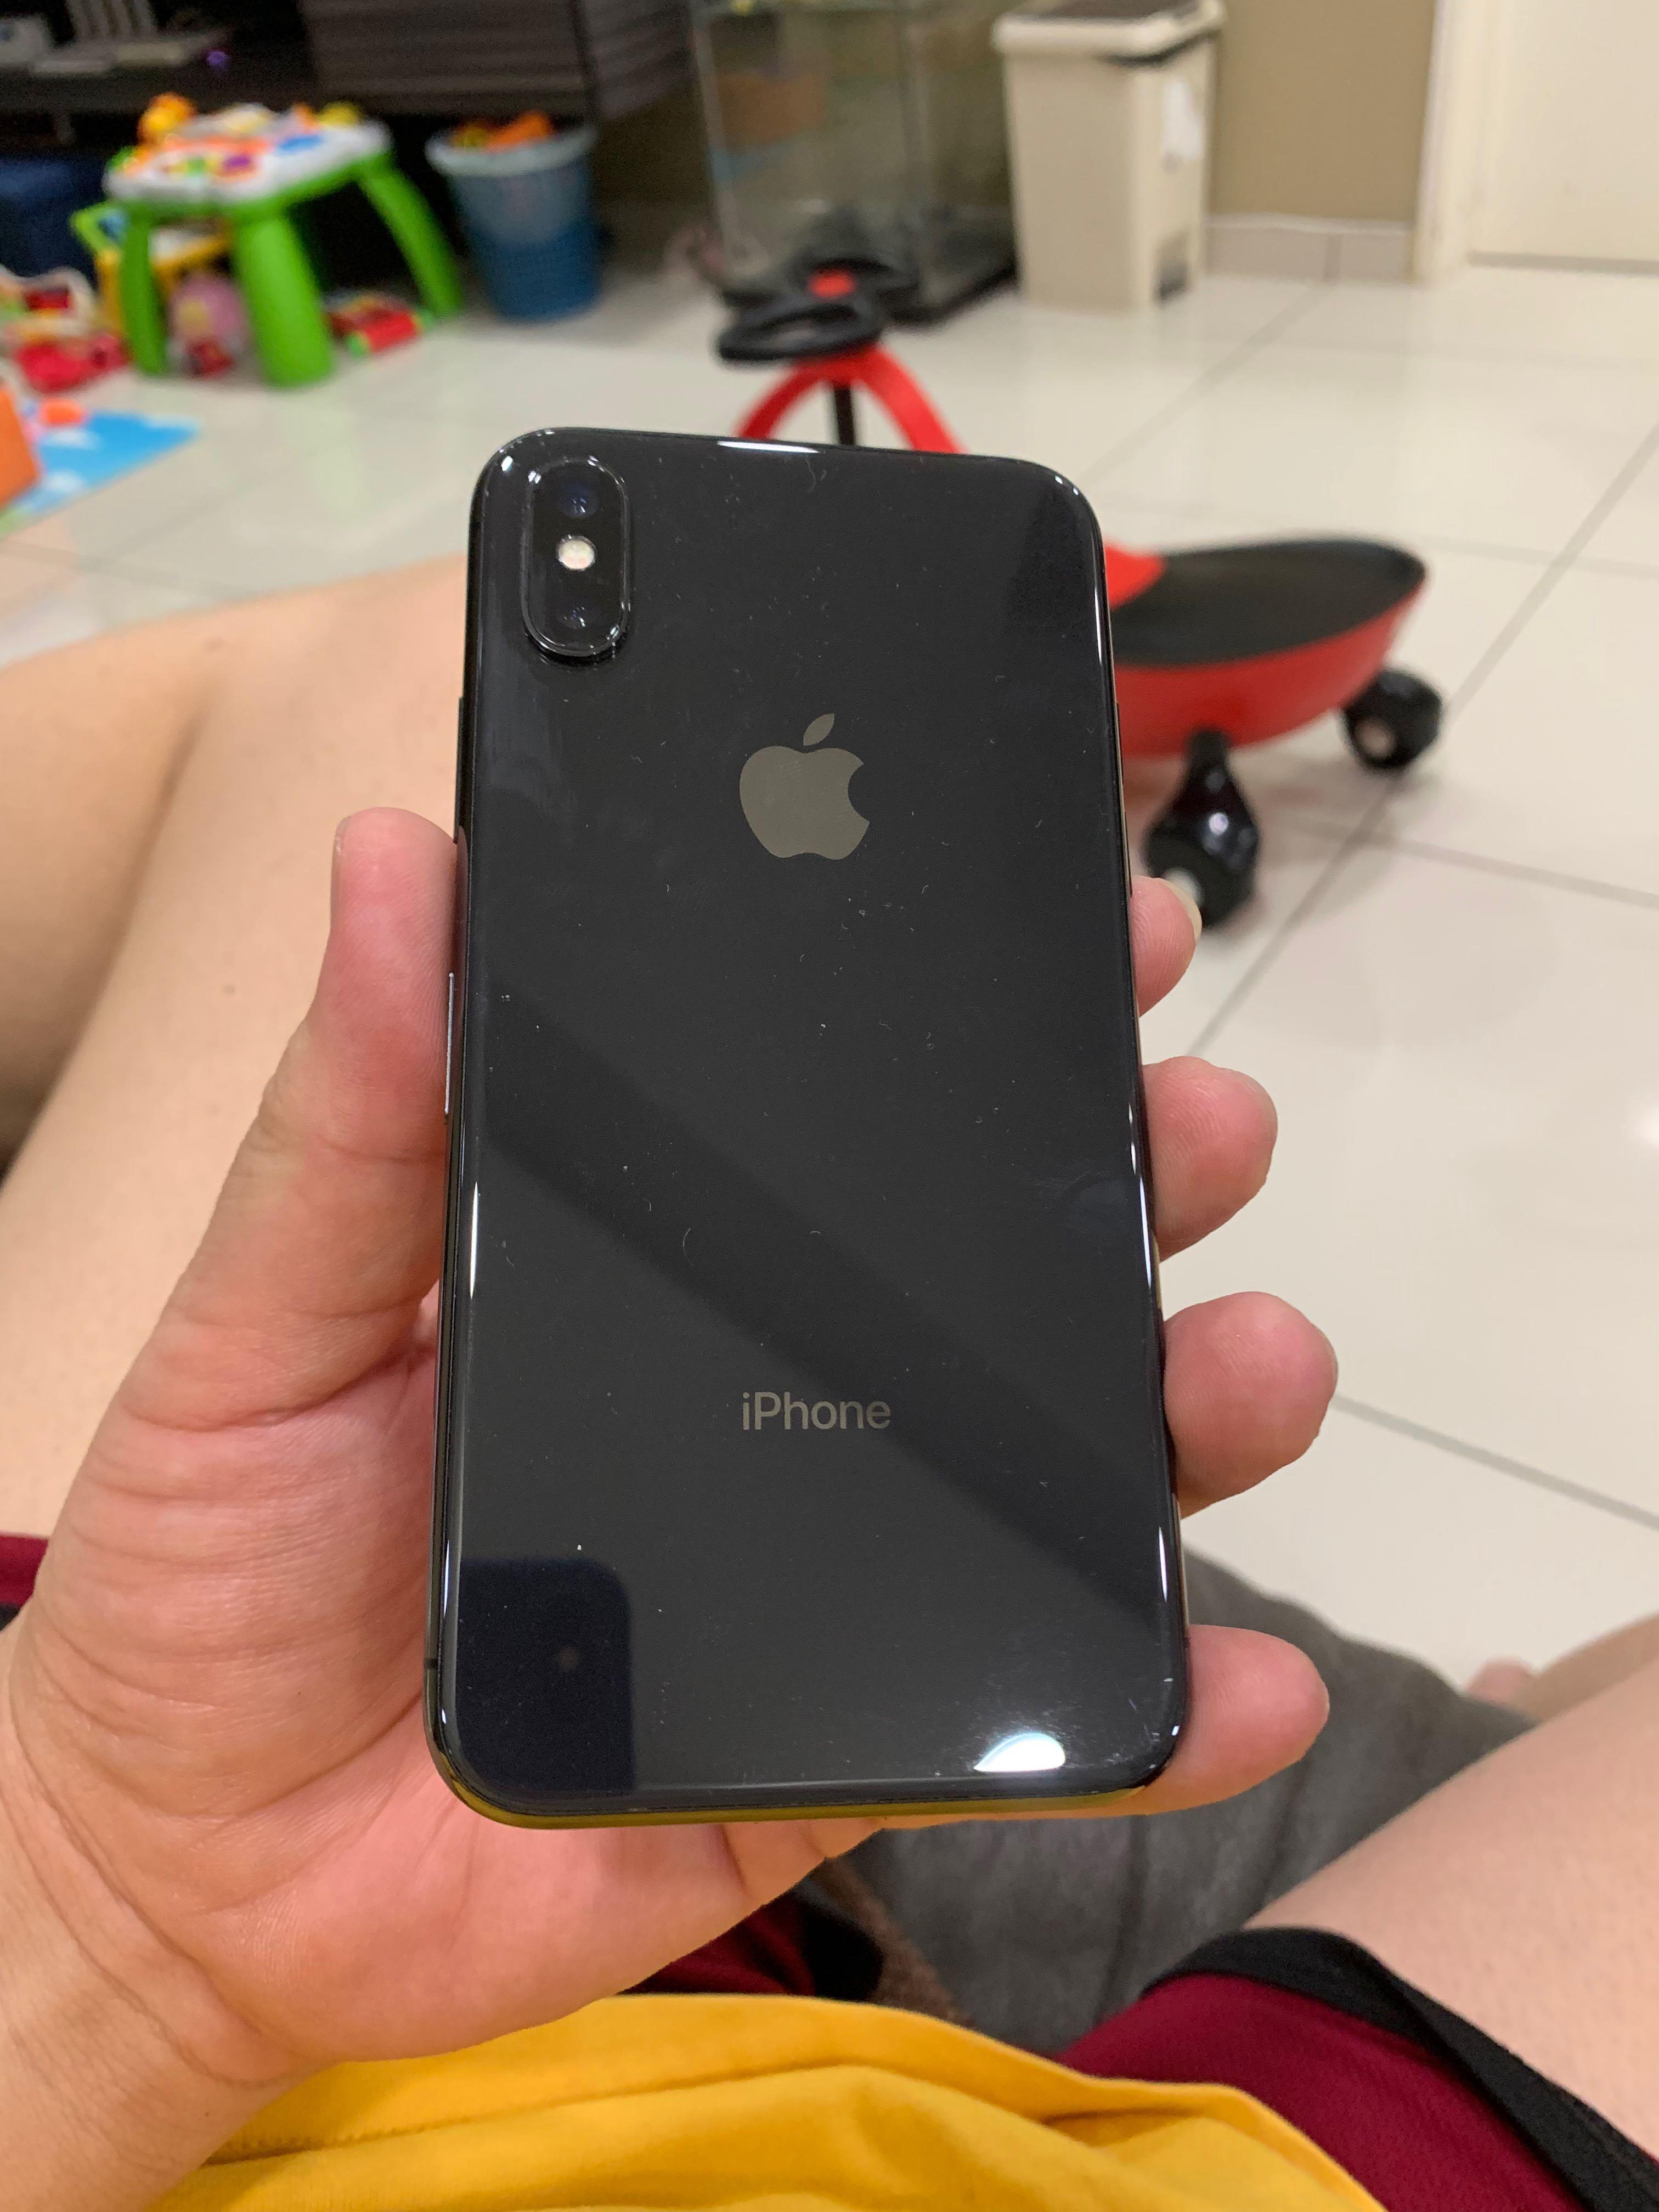 Apple iPhone X 256GB, Mobile Phones & Gadgets, Mobile Phones, iPhone, iPhone  X Series on Carousell